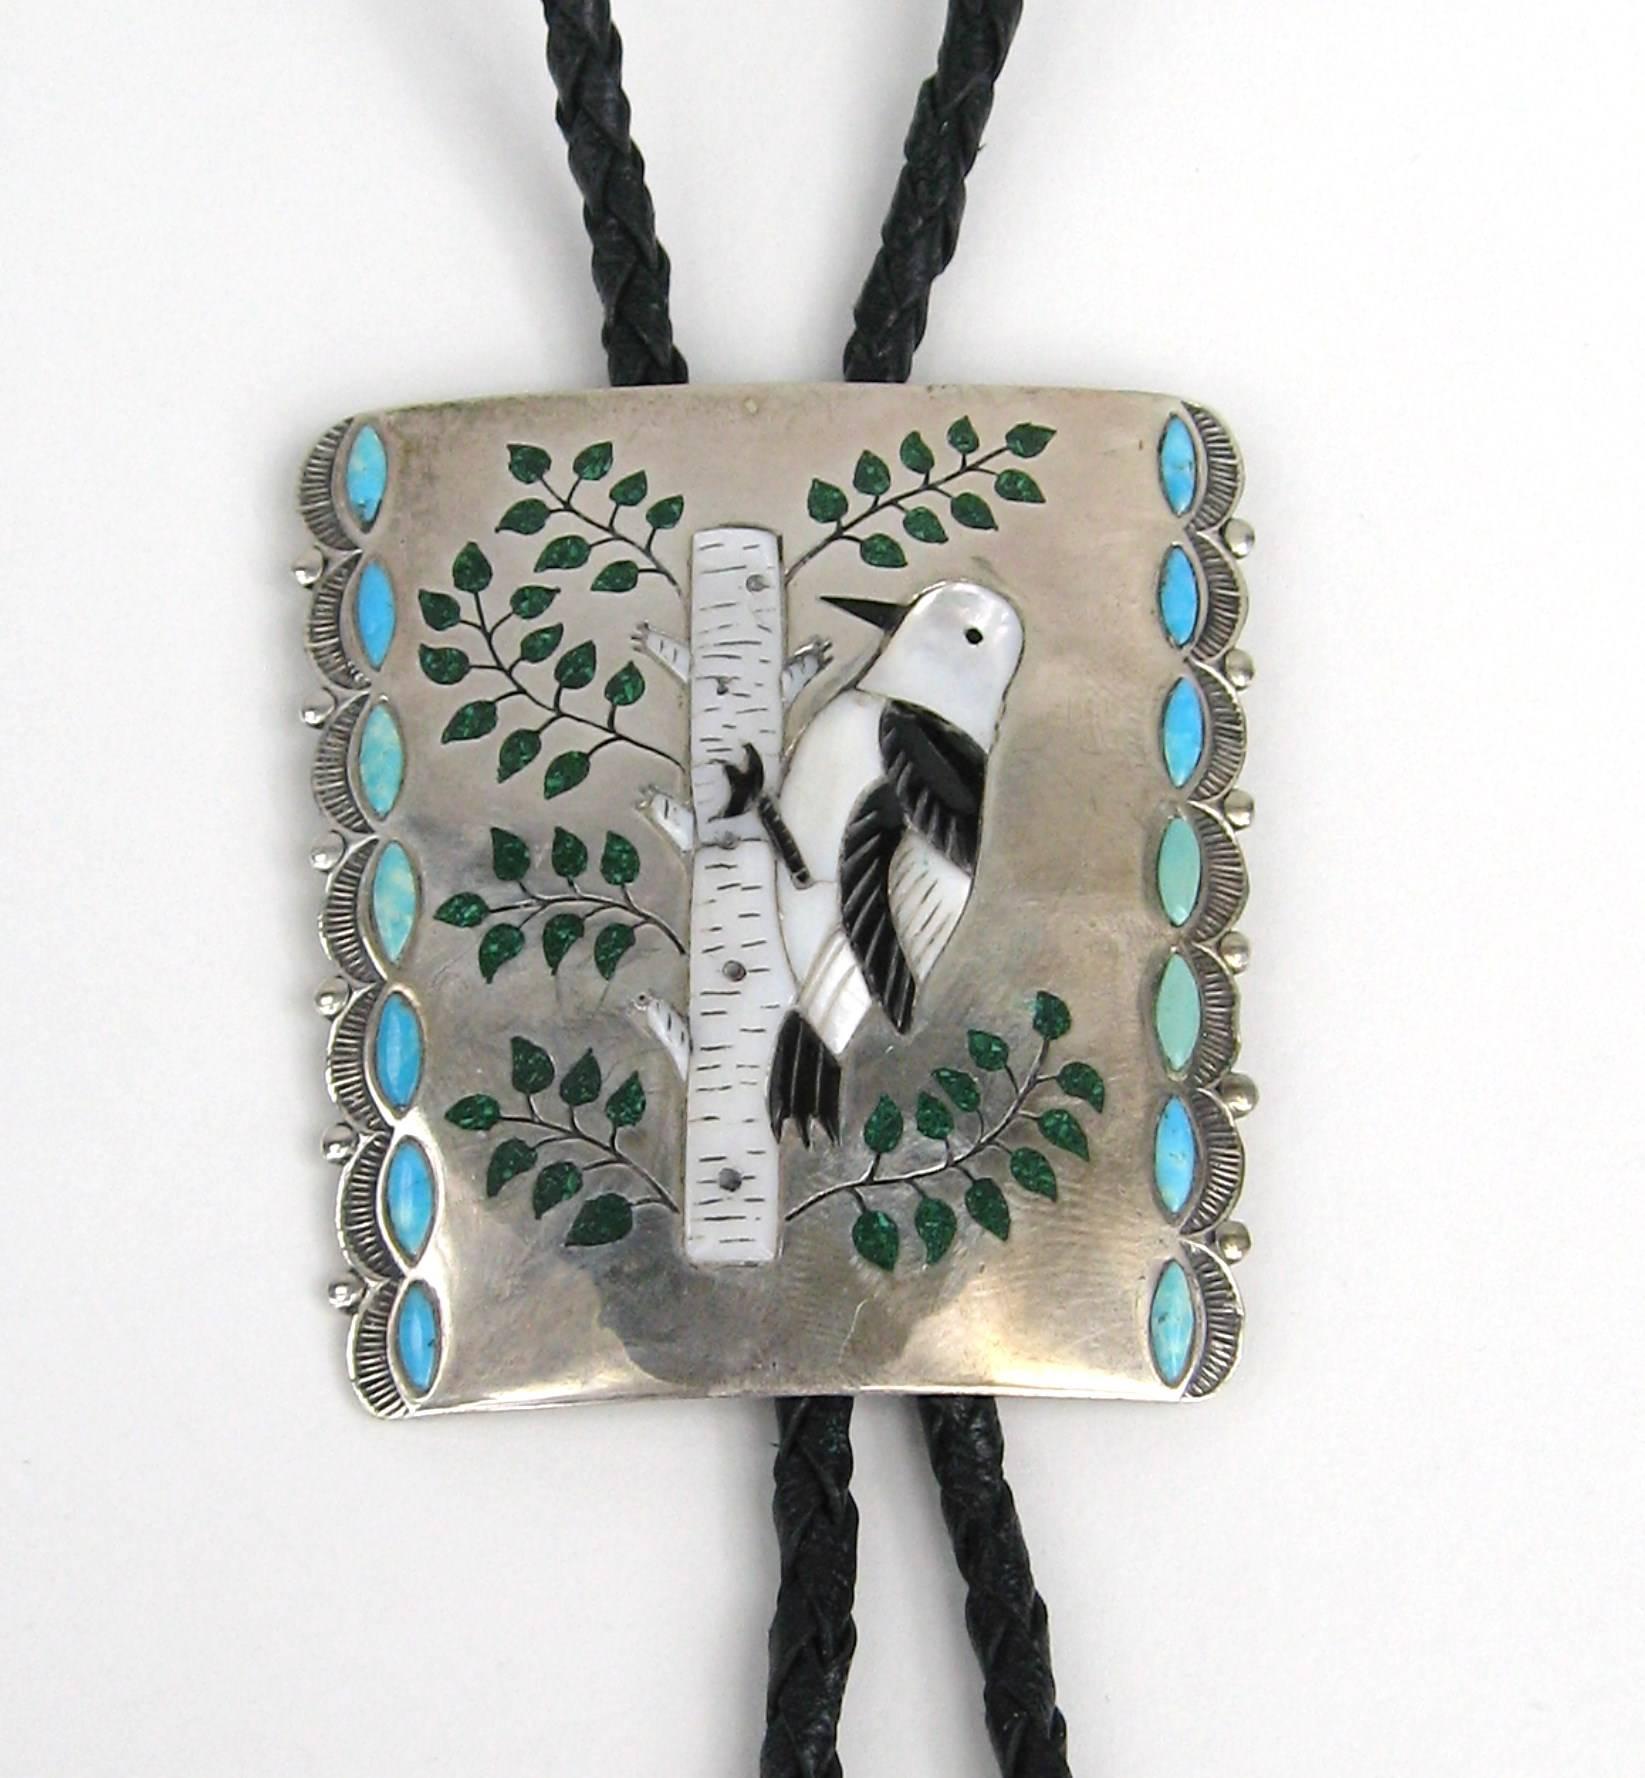 Silas Ohmsatte (1939-1990s) and Bertie Ohmsatt are the Zuni Artisans who created this fantastic bolo from Husband-and-wife team Silas and Bertise Ohmsatte worked in mosaic inlay. Measures  2.48 inches graduates down to 2.18 inches  x 2.73 inches top